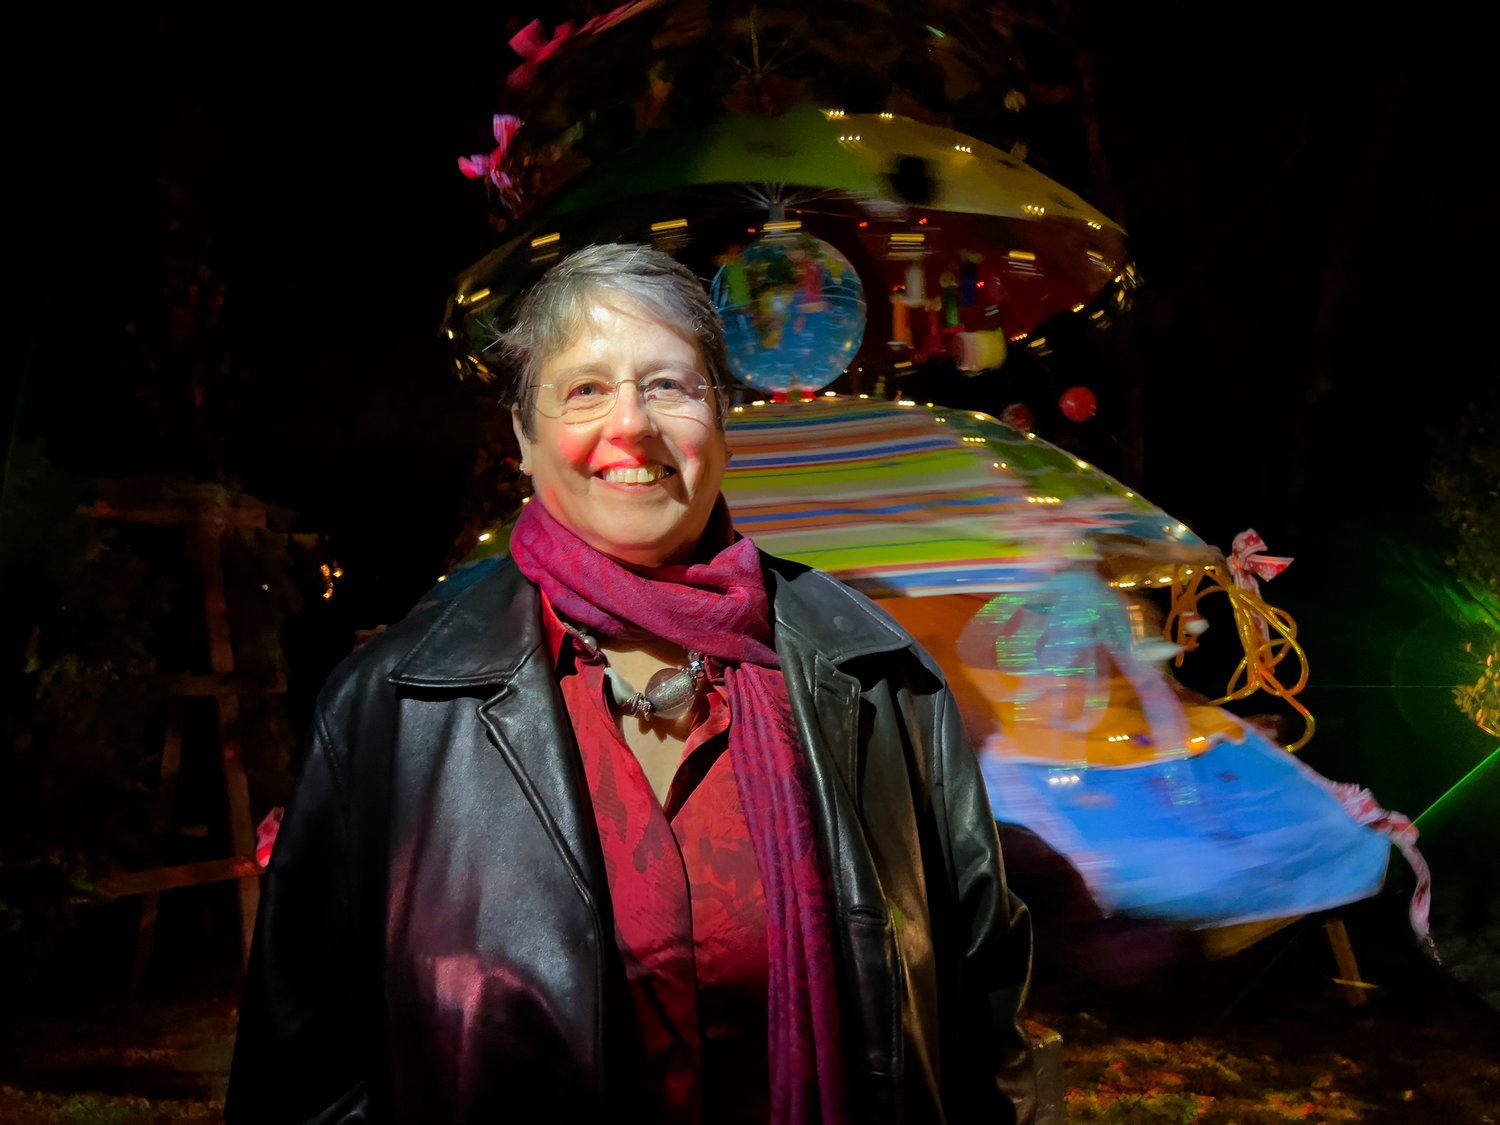 Carmen Grinkis of Tiverton and her tree "One World-Many Colors" 
Combined umbrellas, a globe, pez dispensers, music and a fan motor to make it spin.